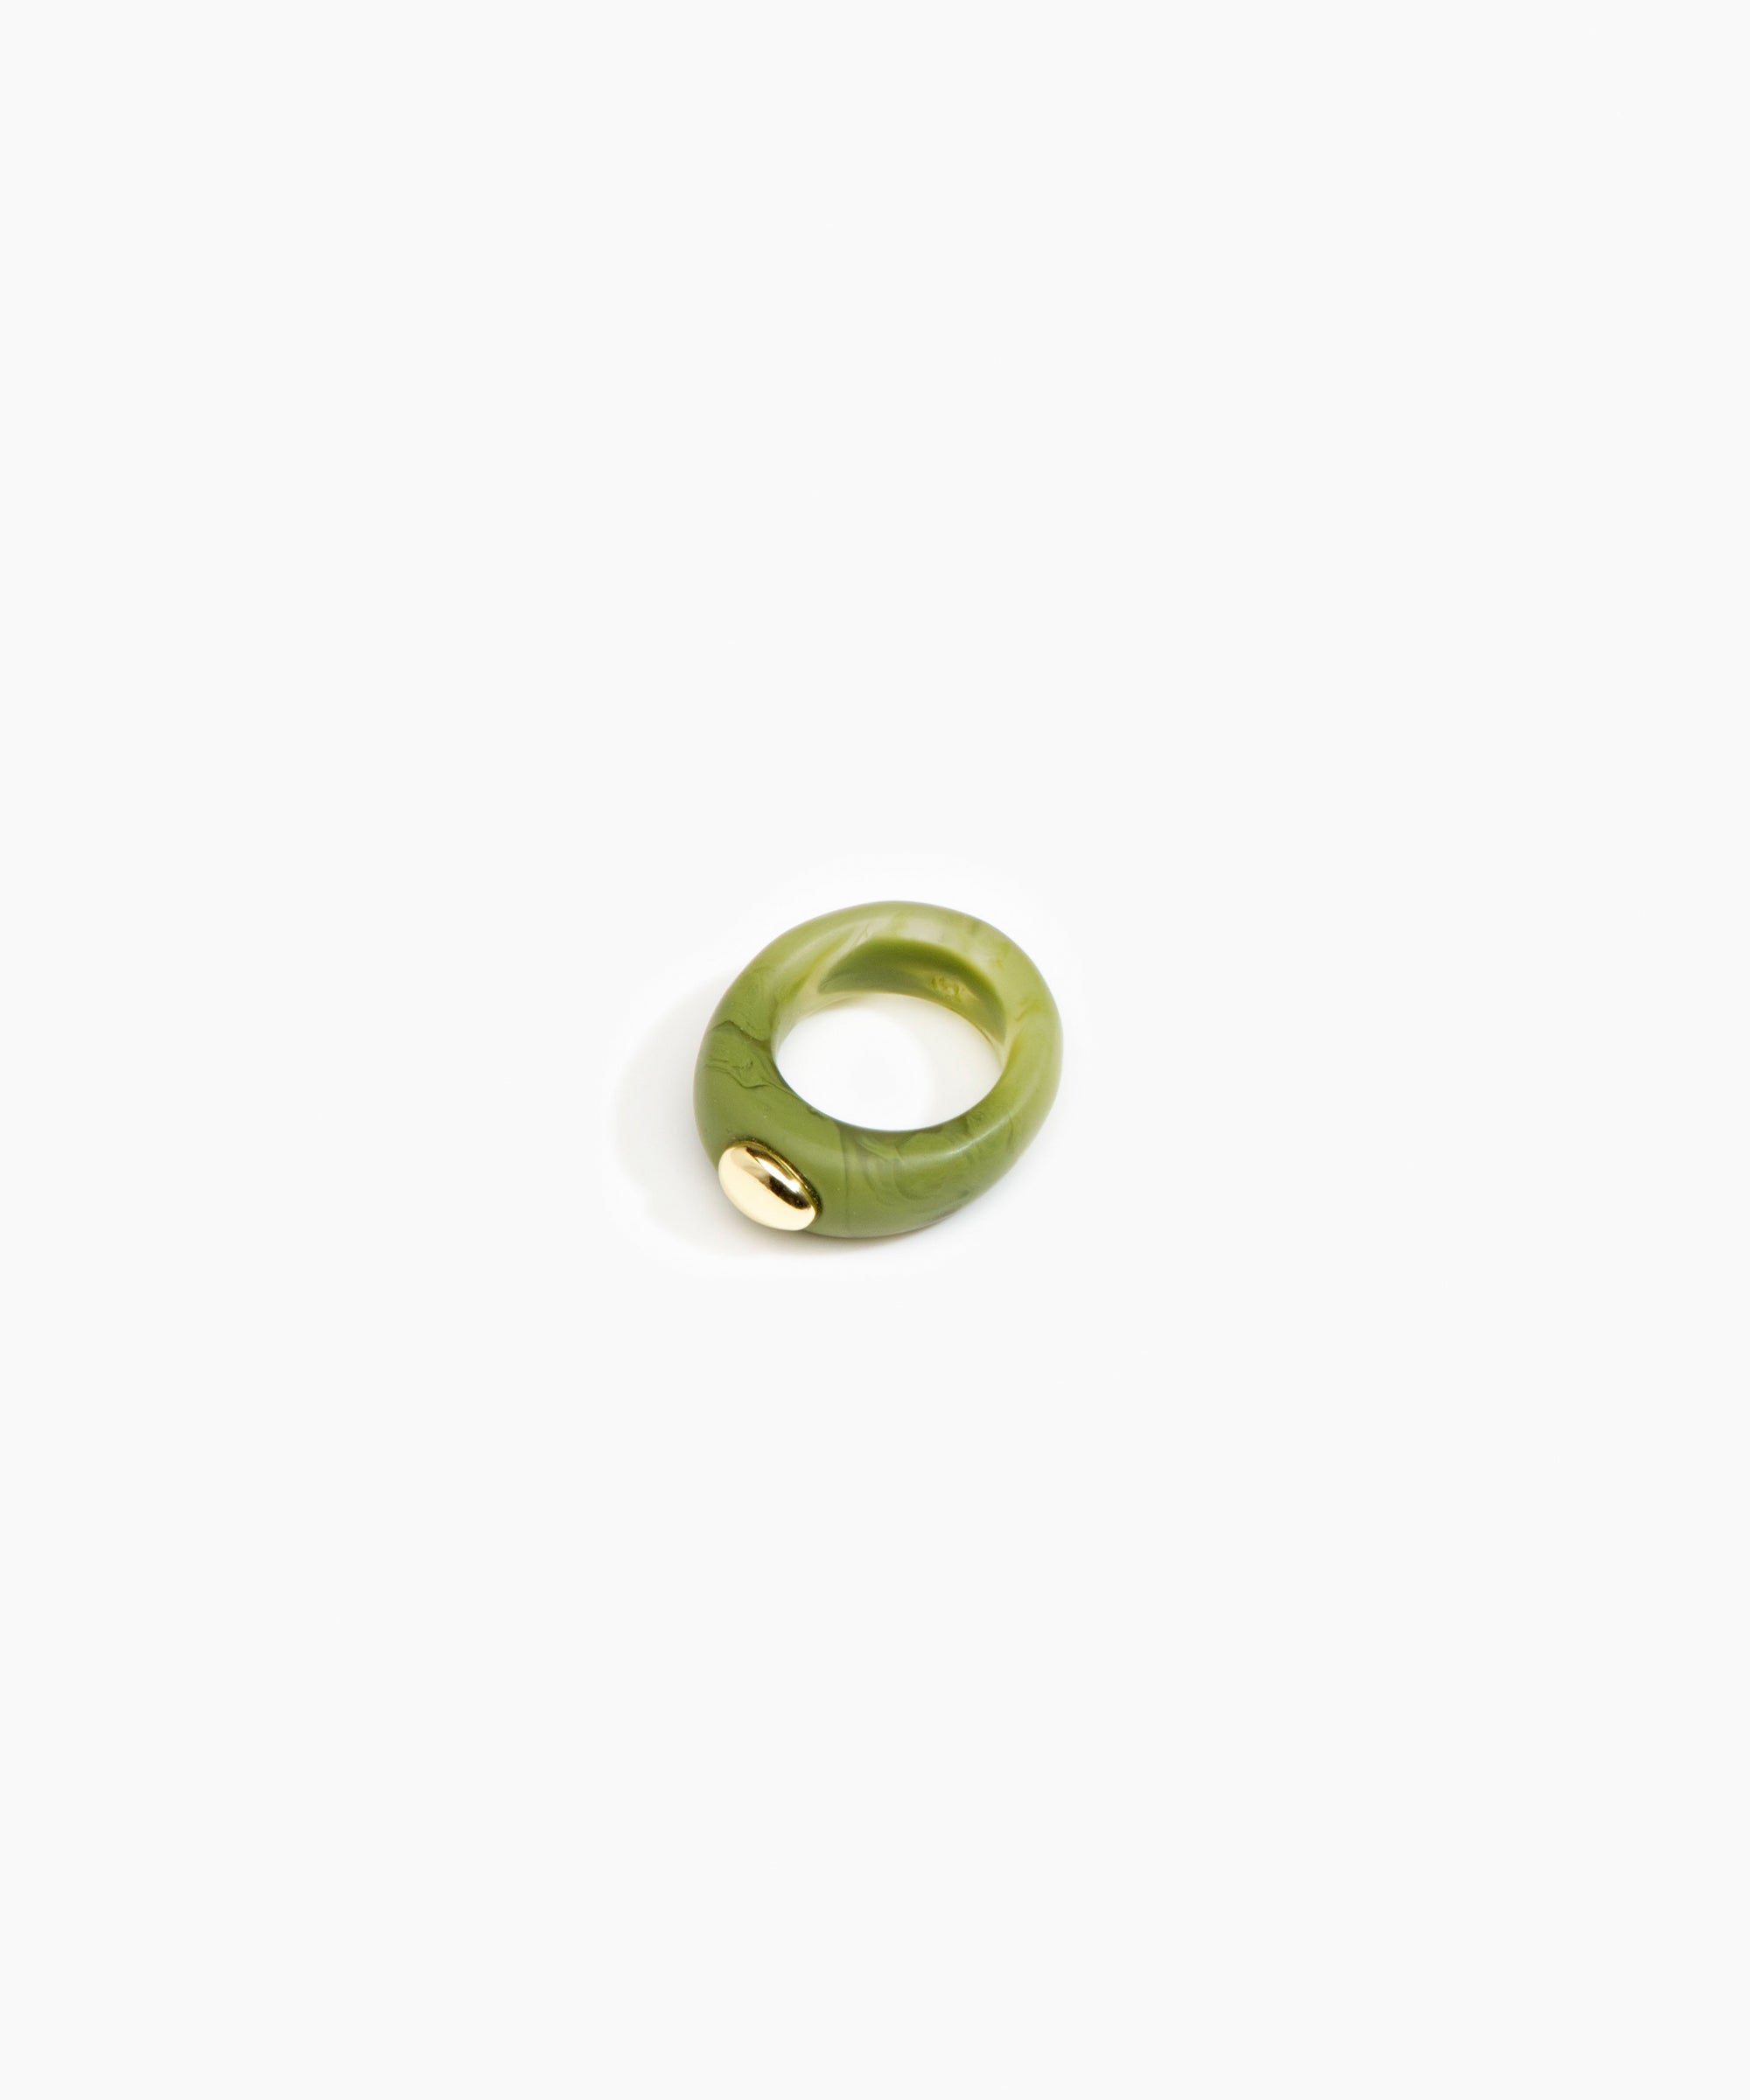 Dinosaur Designs Round Rock Ring Rings in Olive color resin